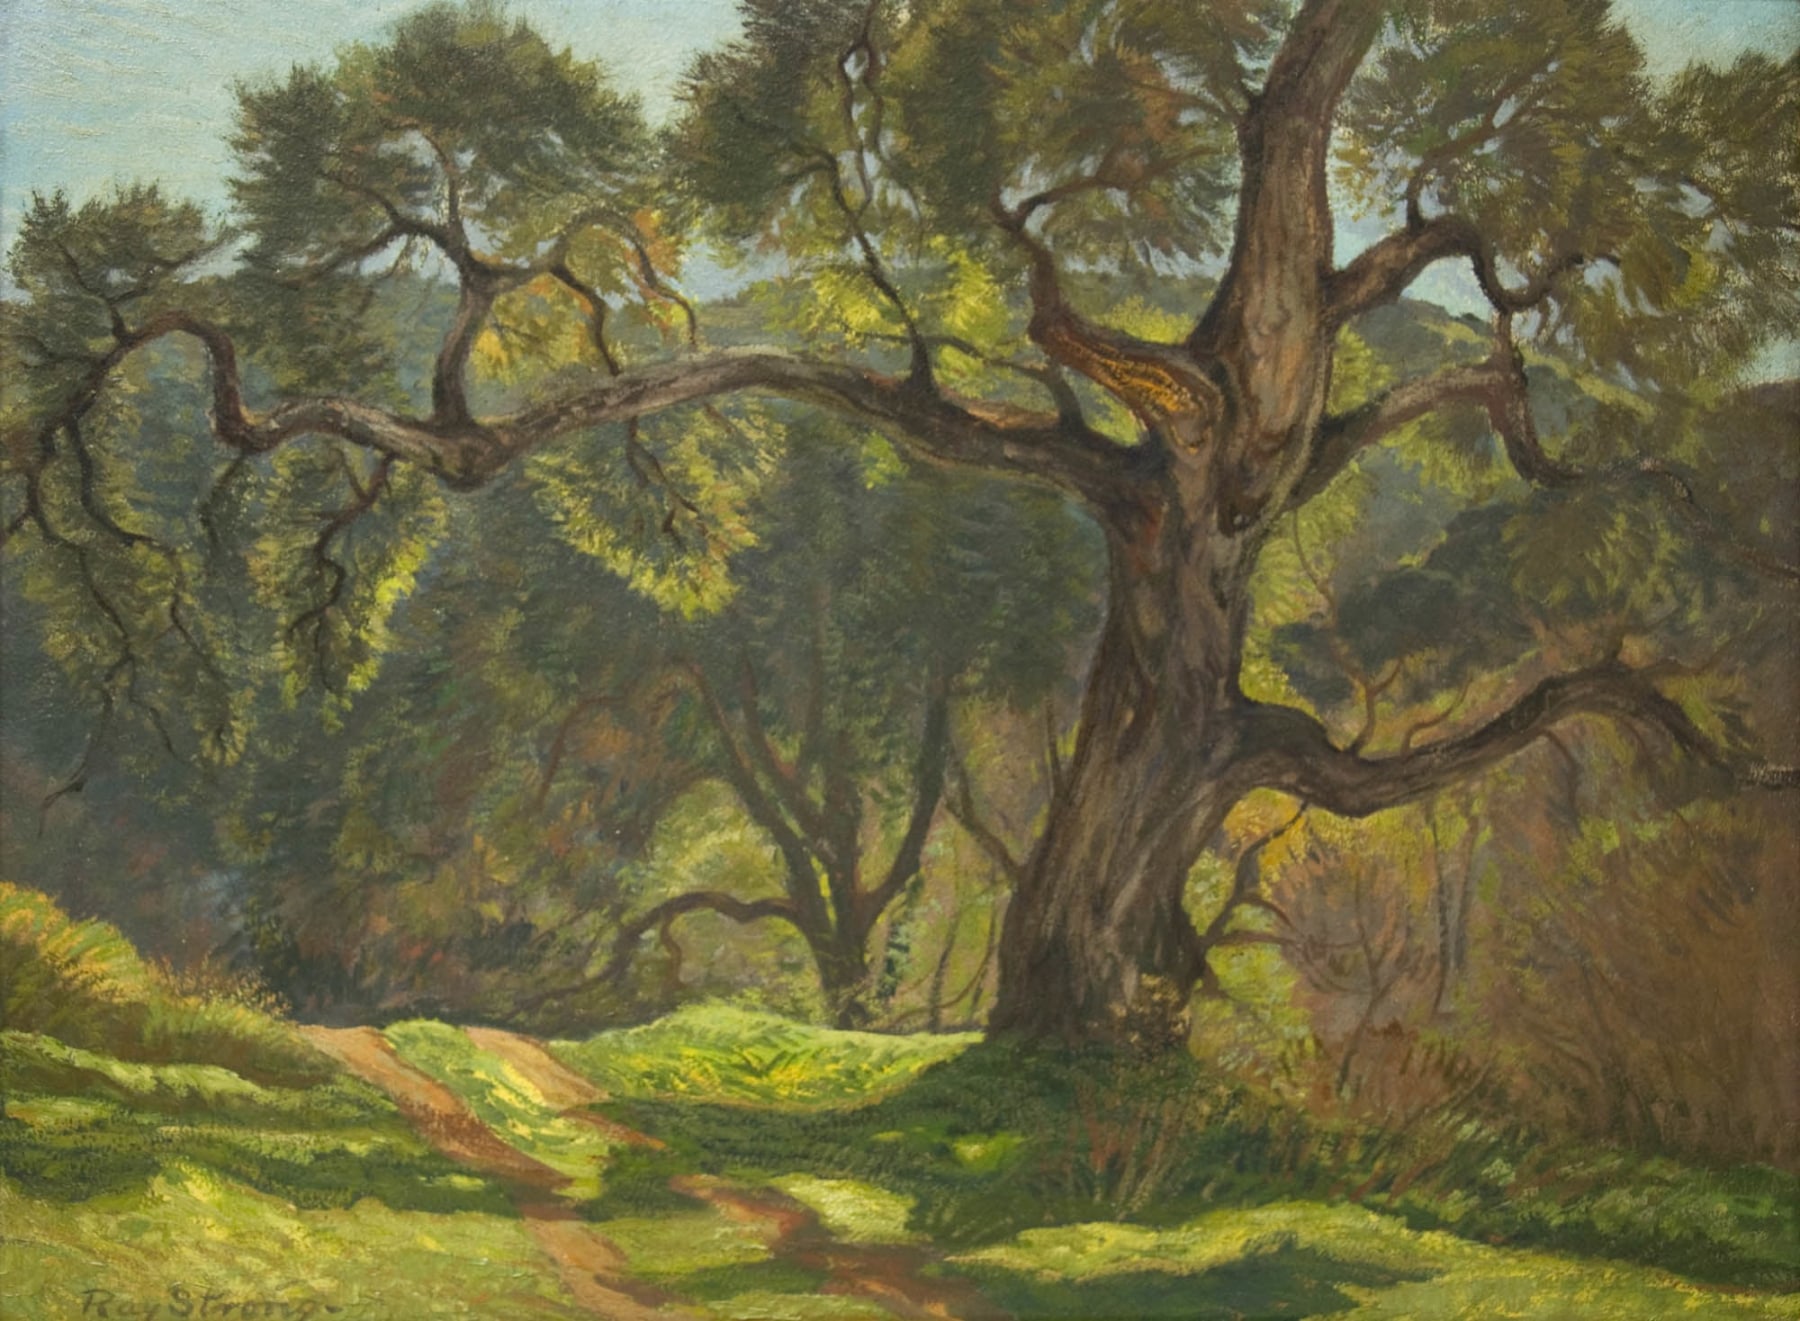 Ray Strong, Large Oaks, 1975